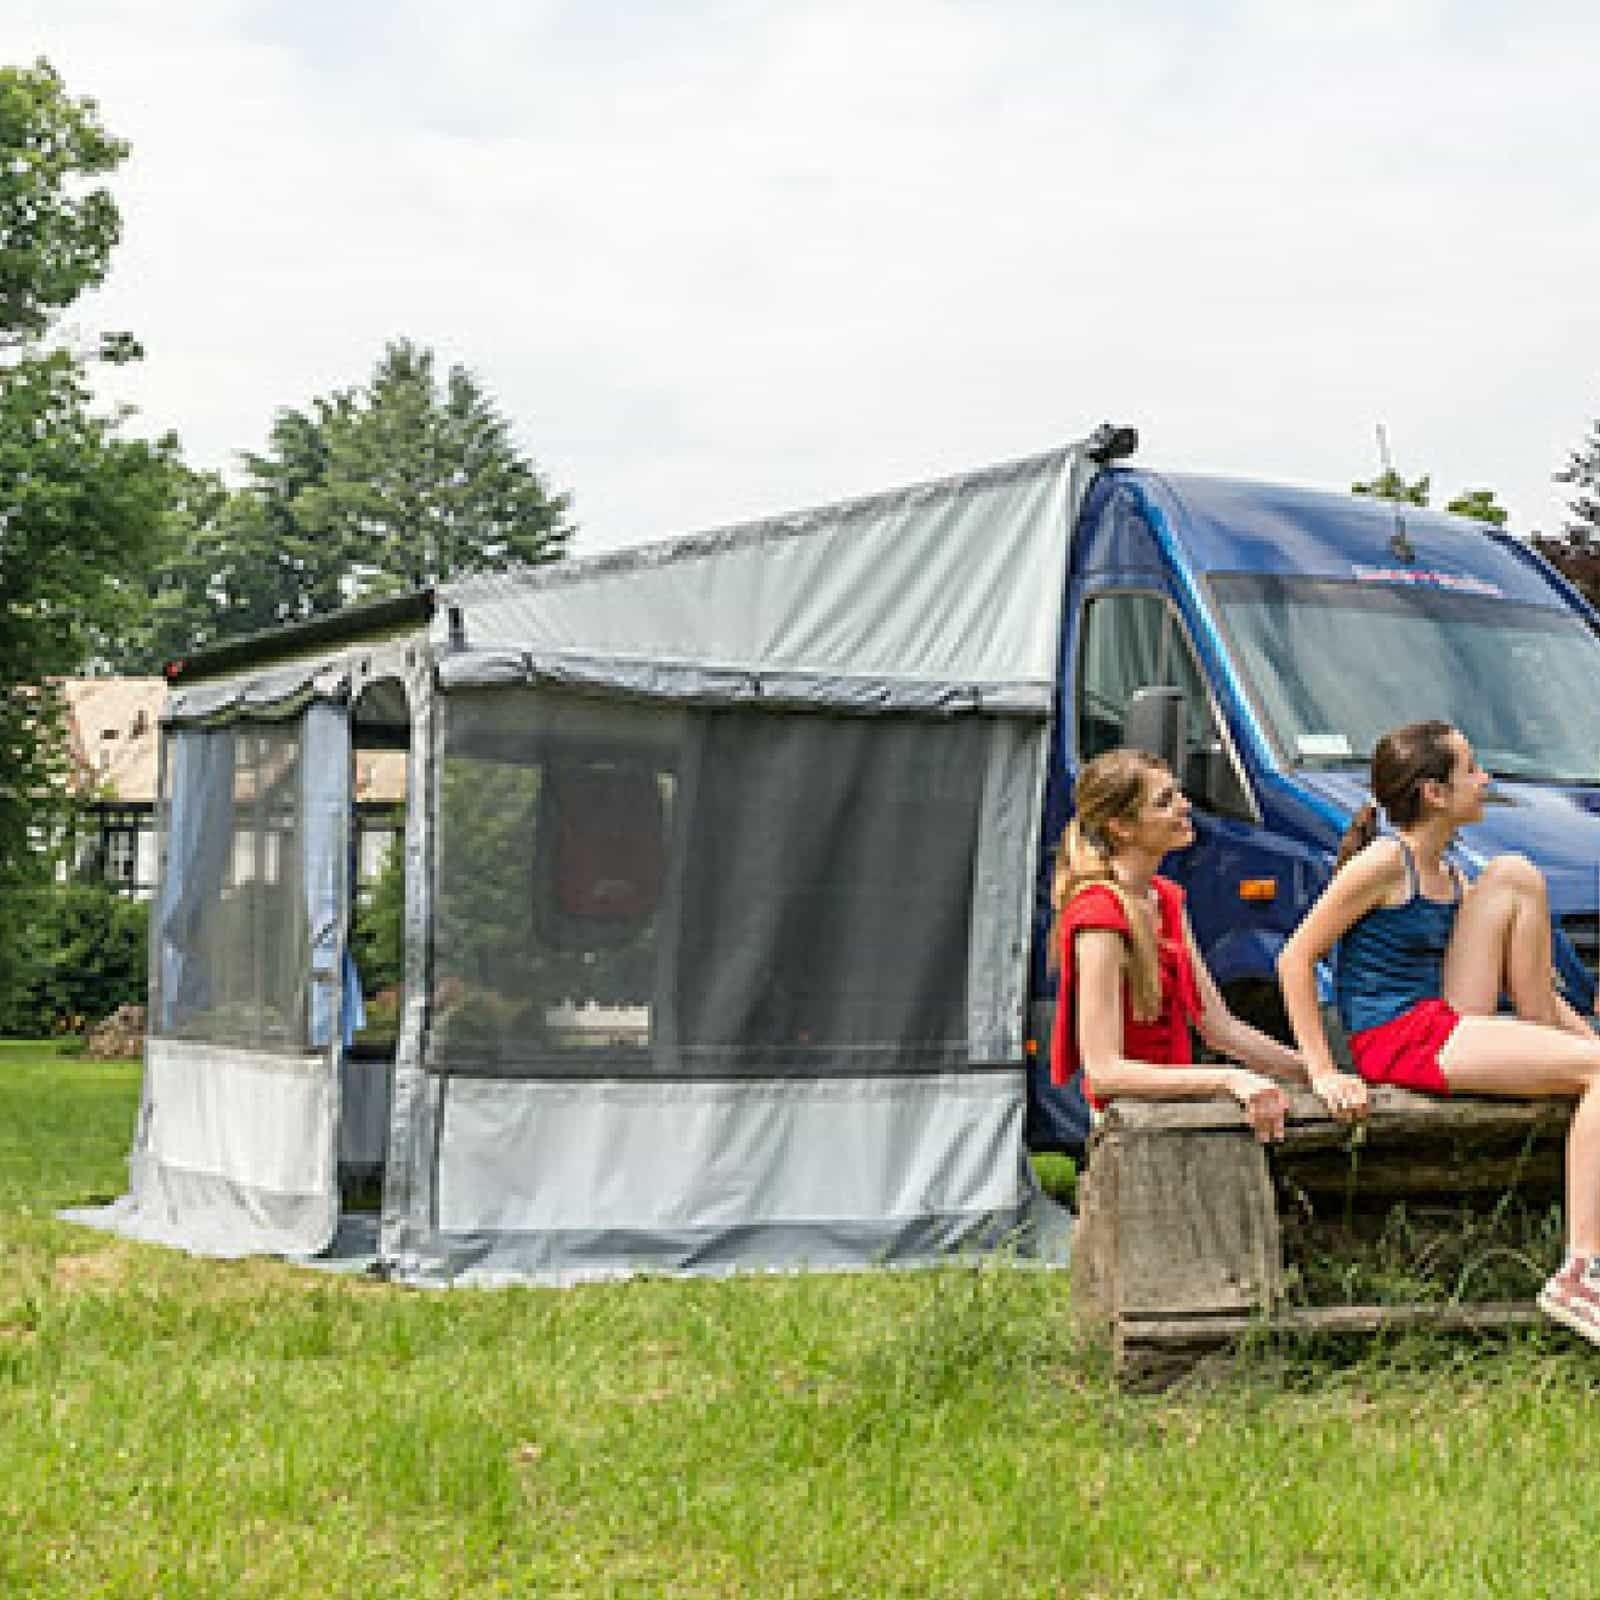 Fiamma Large Privacy Room made by Fiamma. A Tent sold by Quality Caravan Awnings